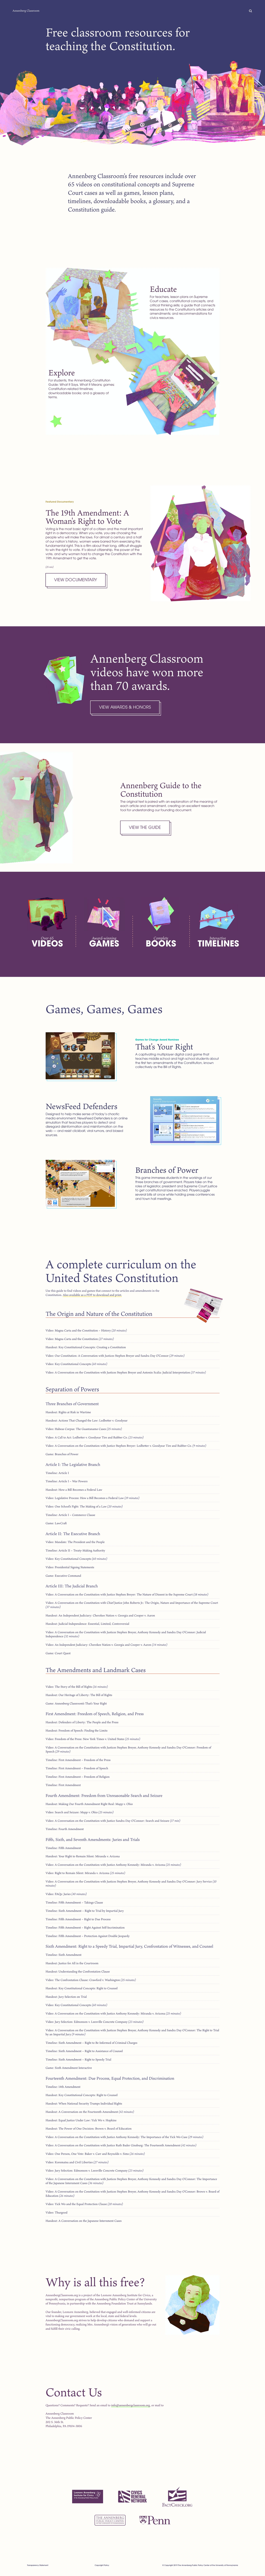 Annenberg Classroom Landing Page Example: Annenberg Classroom's free resources include over 65 videos on constitutional concepts and Supreme Court cases as well as games, lesson plans, timelines, downloadable books, a glossary, and a Constitution guide.